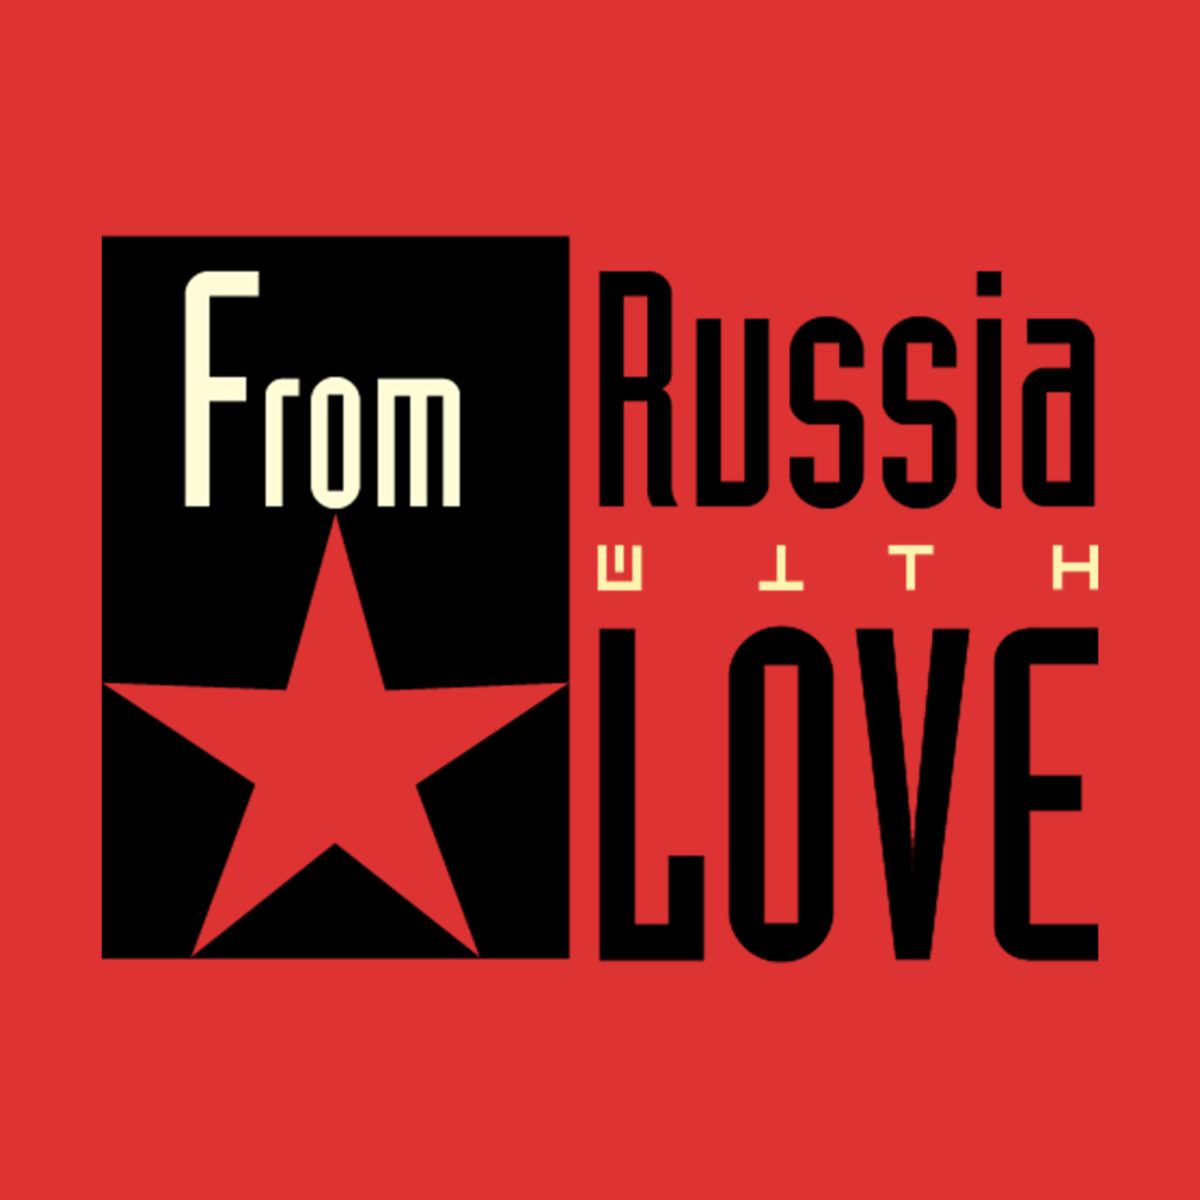 #Stayhome, instead of “From Russia with Love!”